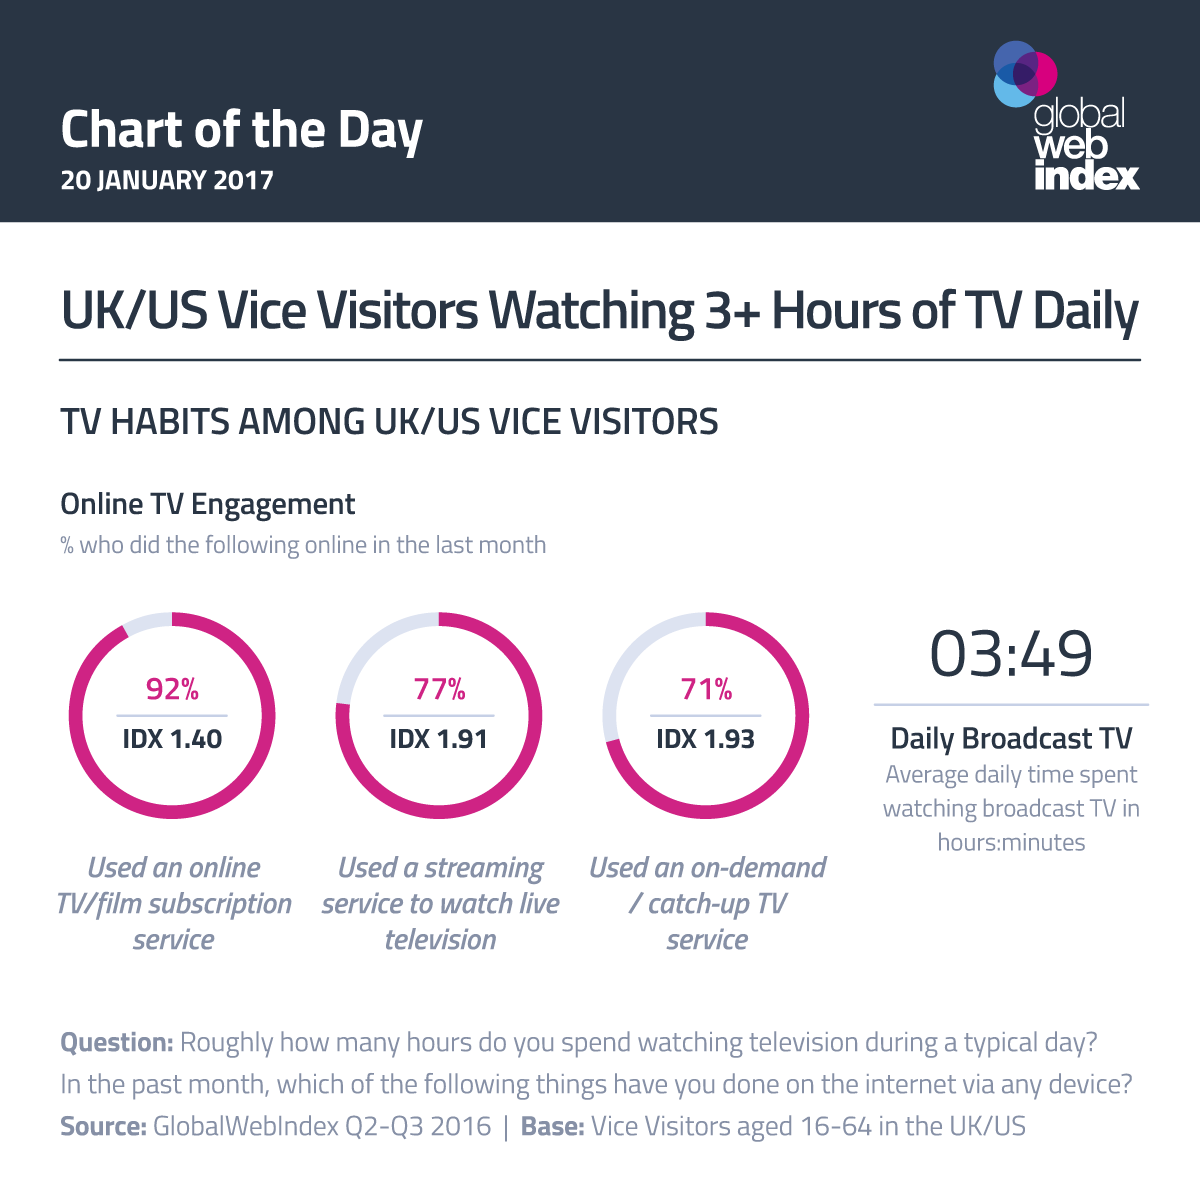 UK/US Vice Visitors Watching 3+ Hours of TV Daily